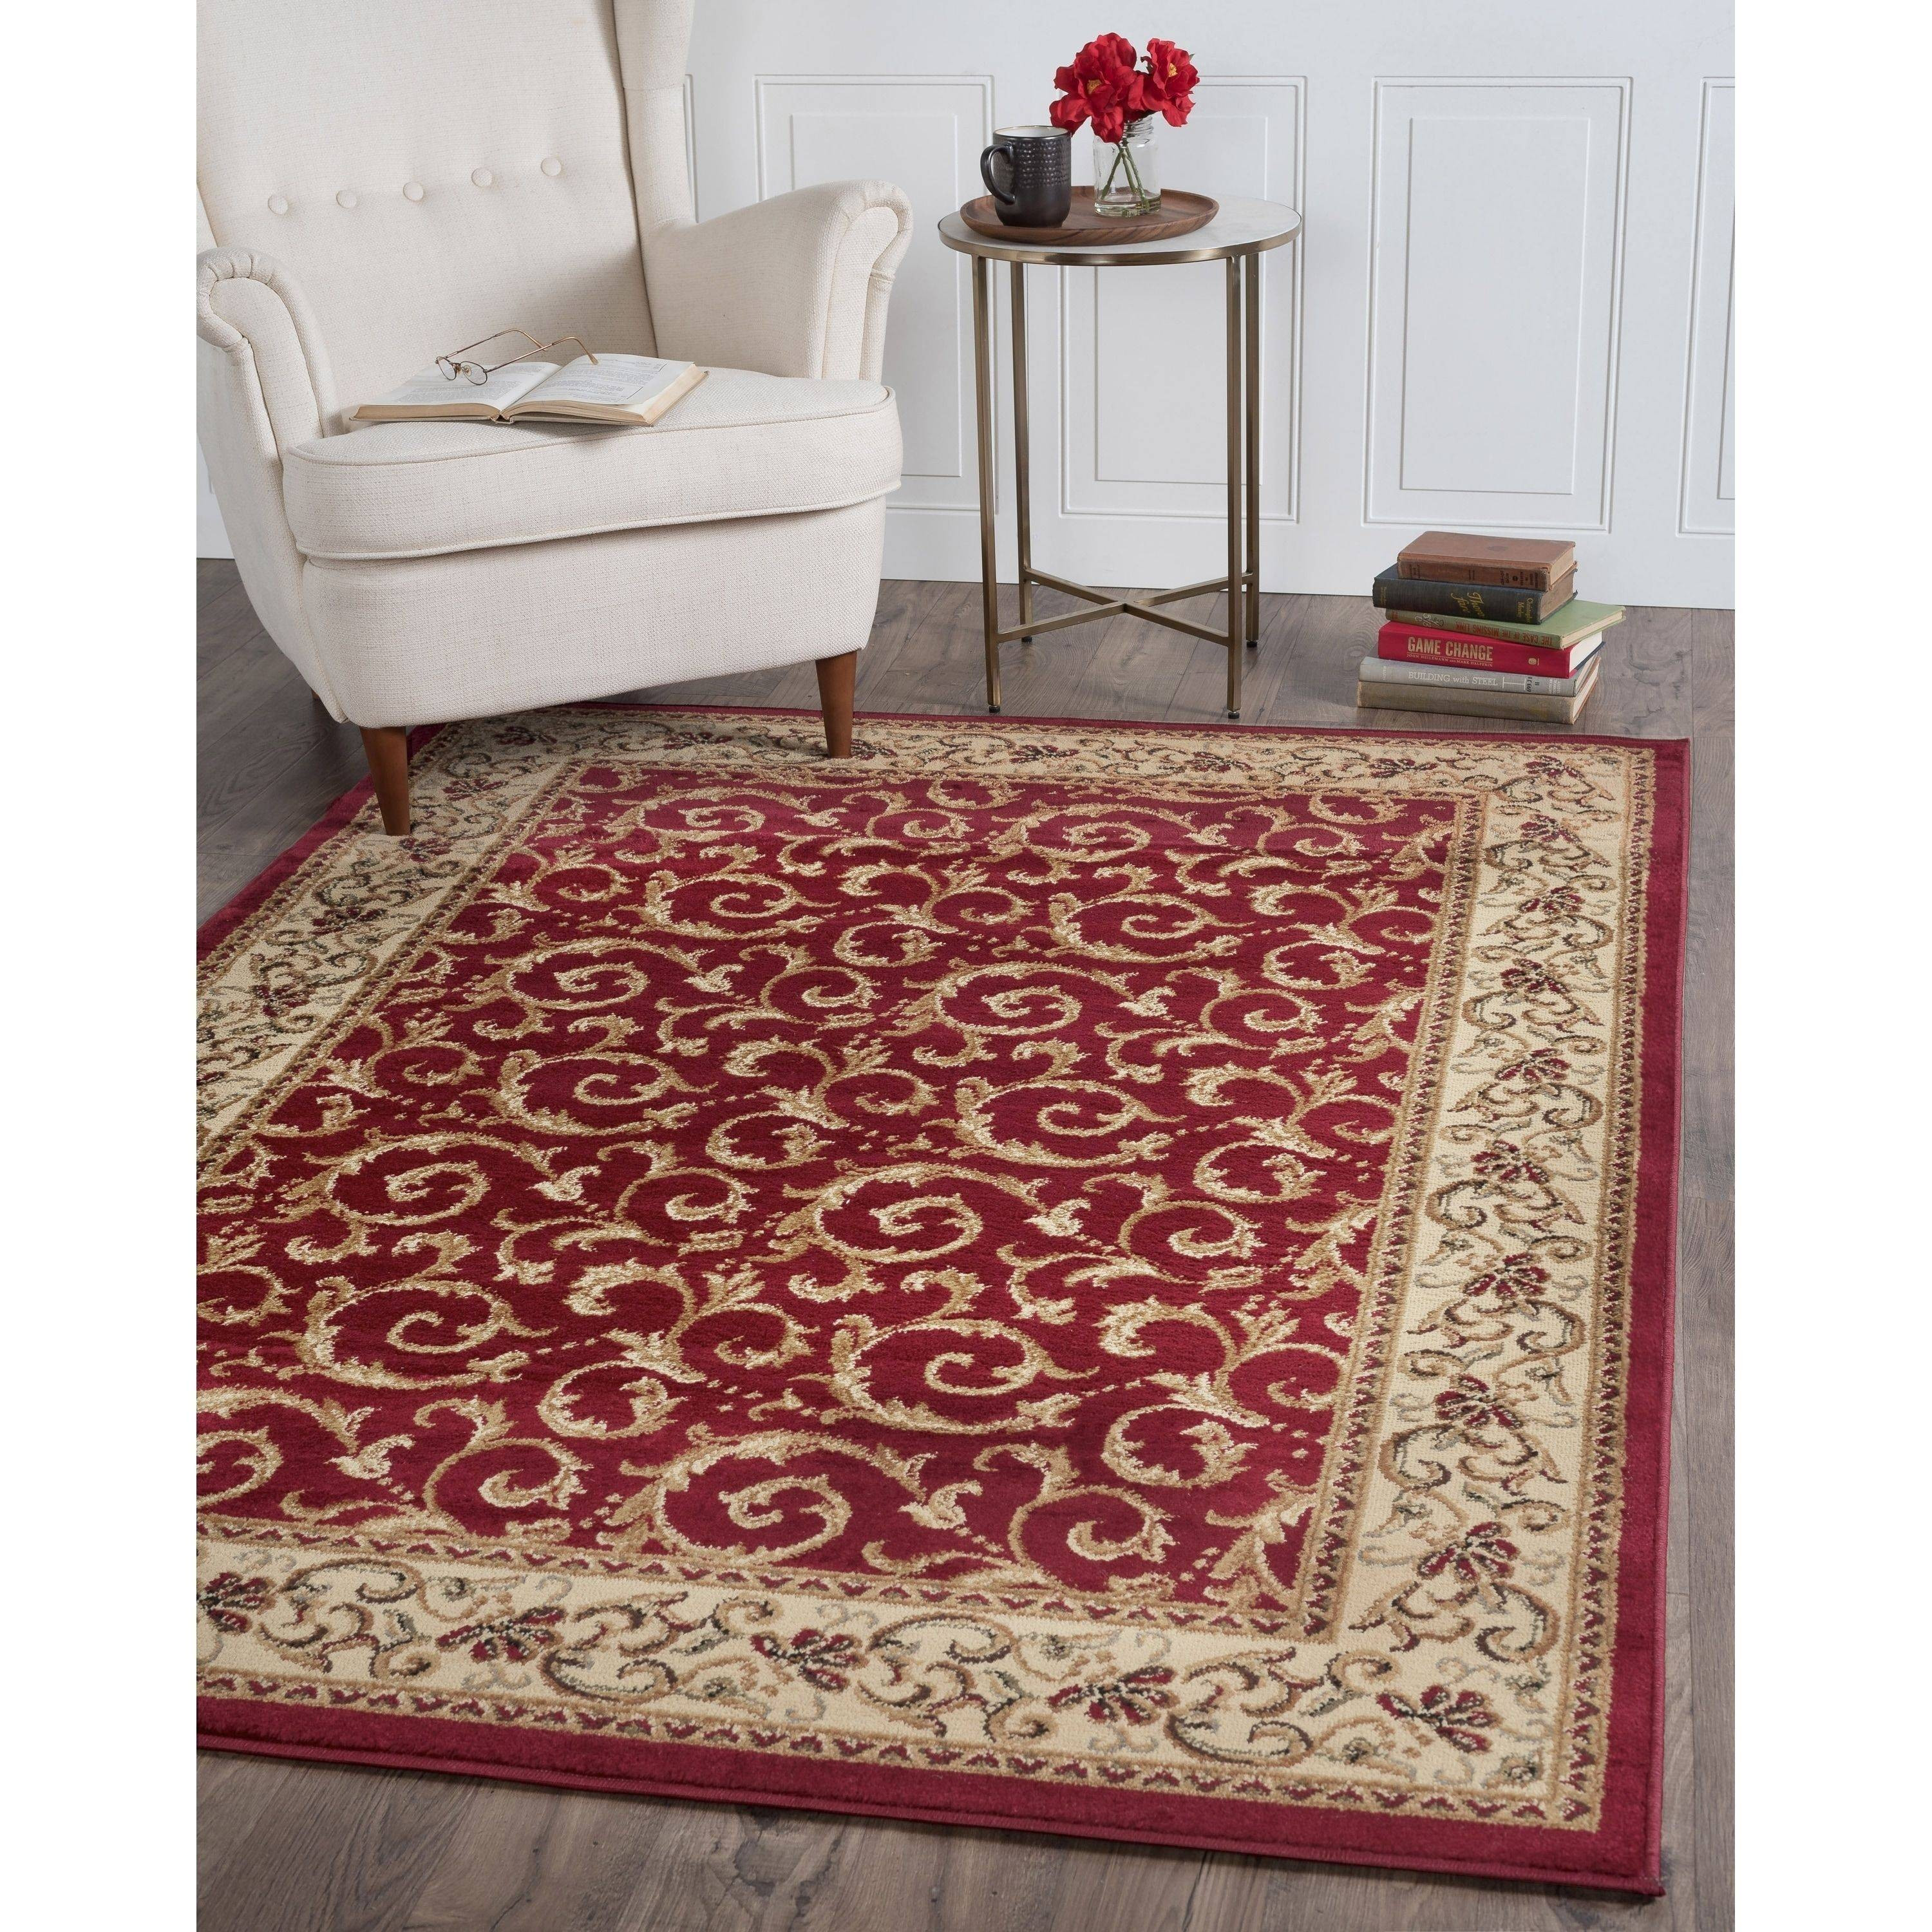 hardwood floor discount stores of cheapest place to buy area rugs awesome area rugs for hardwood with cheapest place to buy area rugs lovely furniture design 5a7 rug lovely 7 by